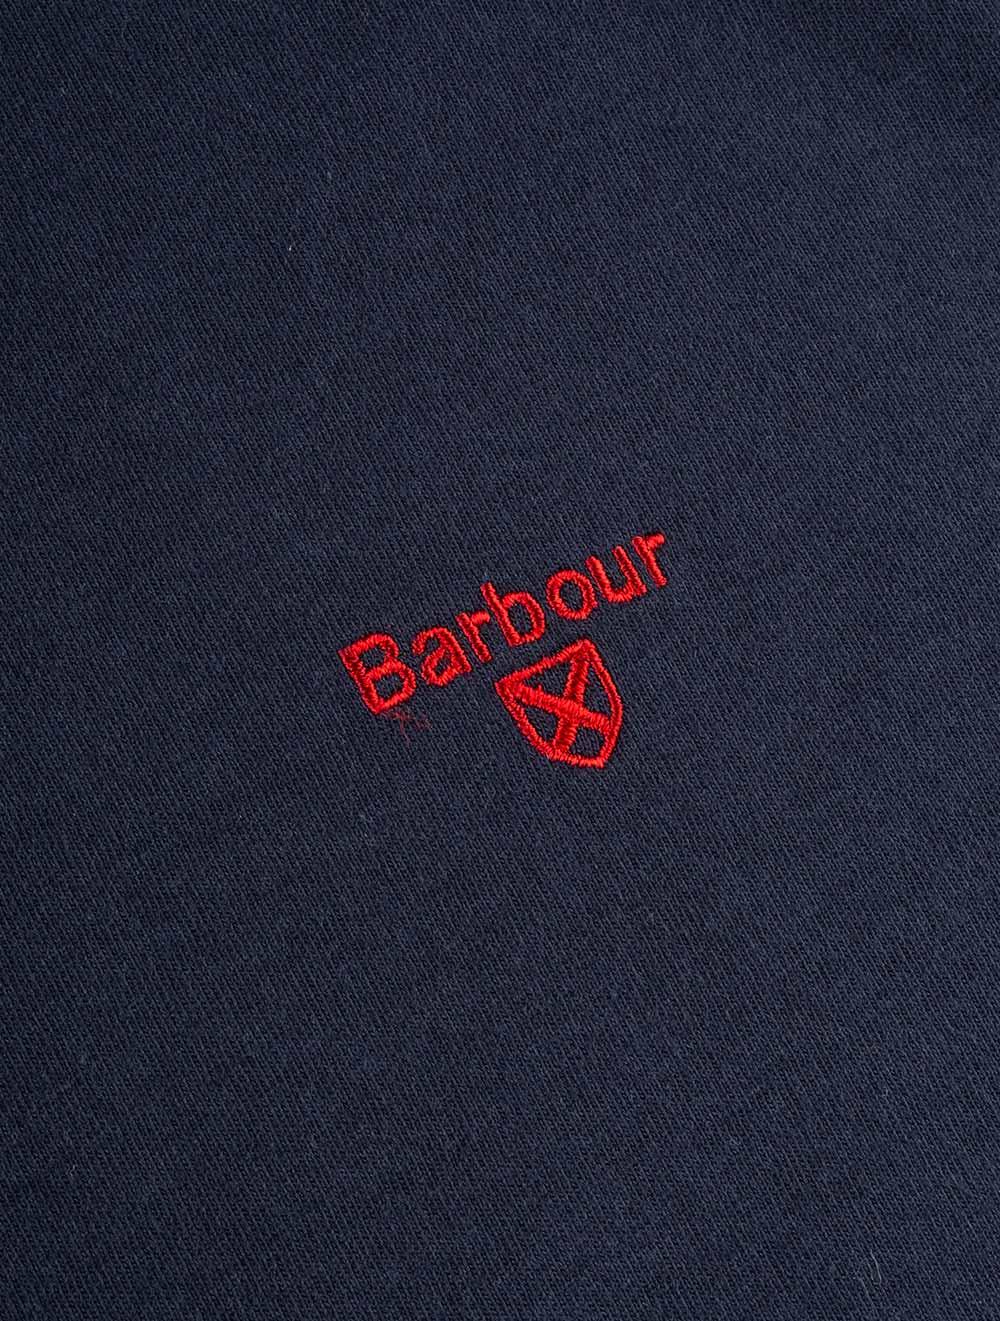 Barbour Sports T Shirt Navy